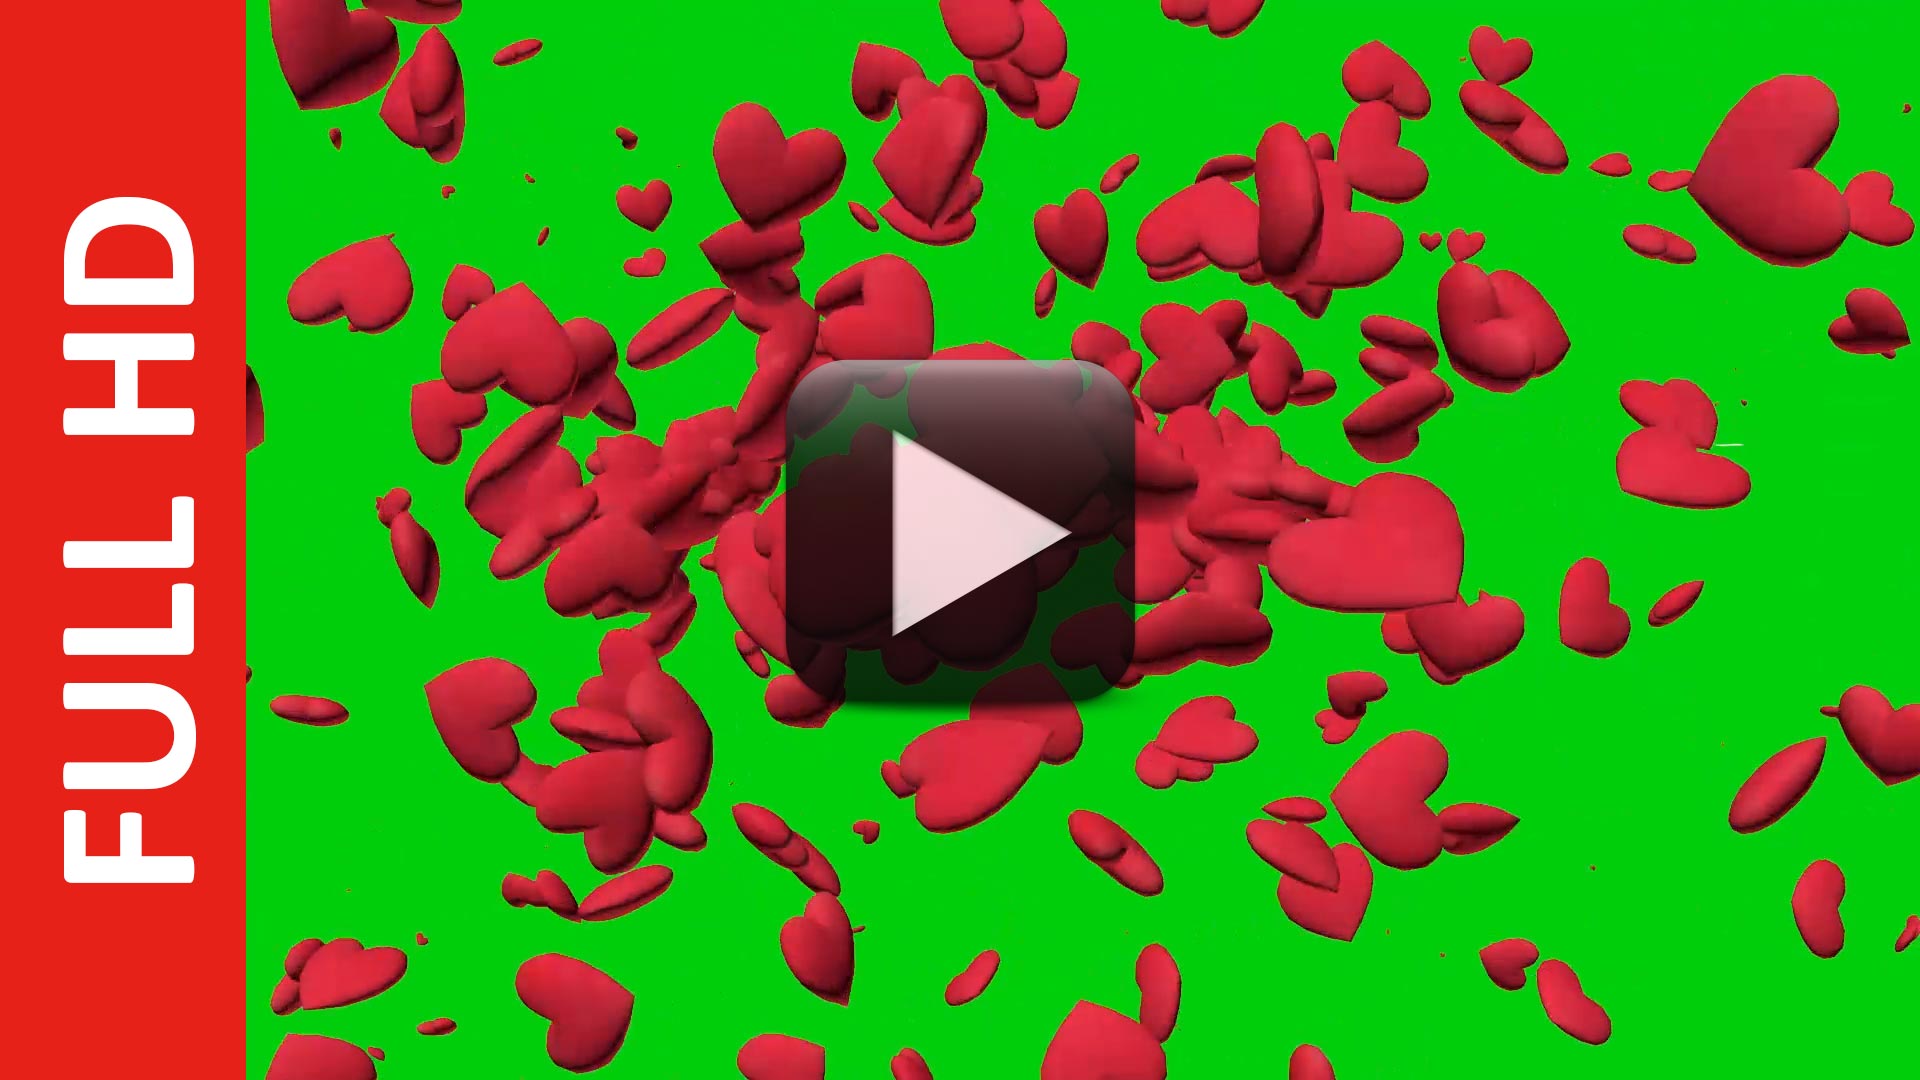 Heart Animation Green Screen Free Download | All Design Creative